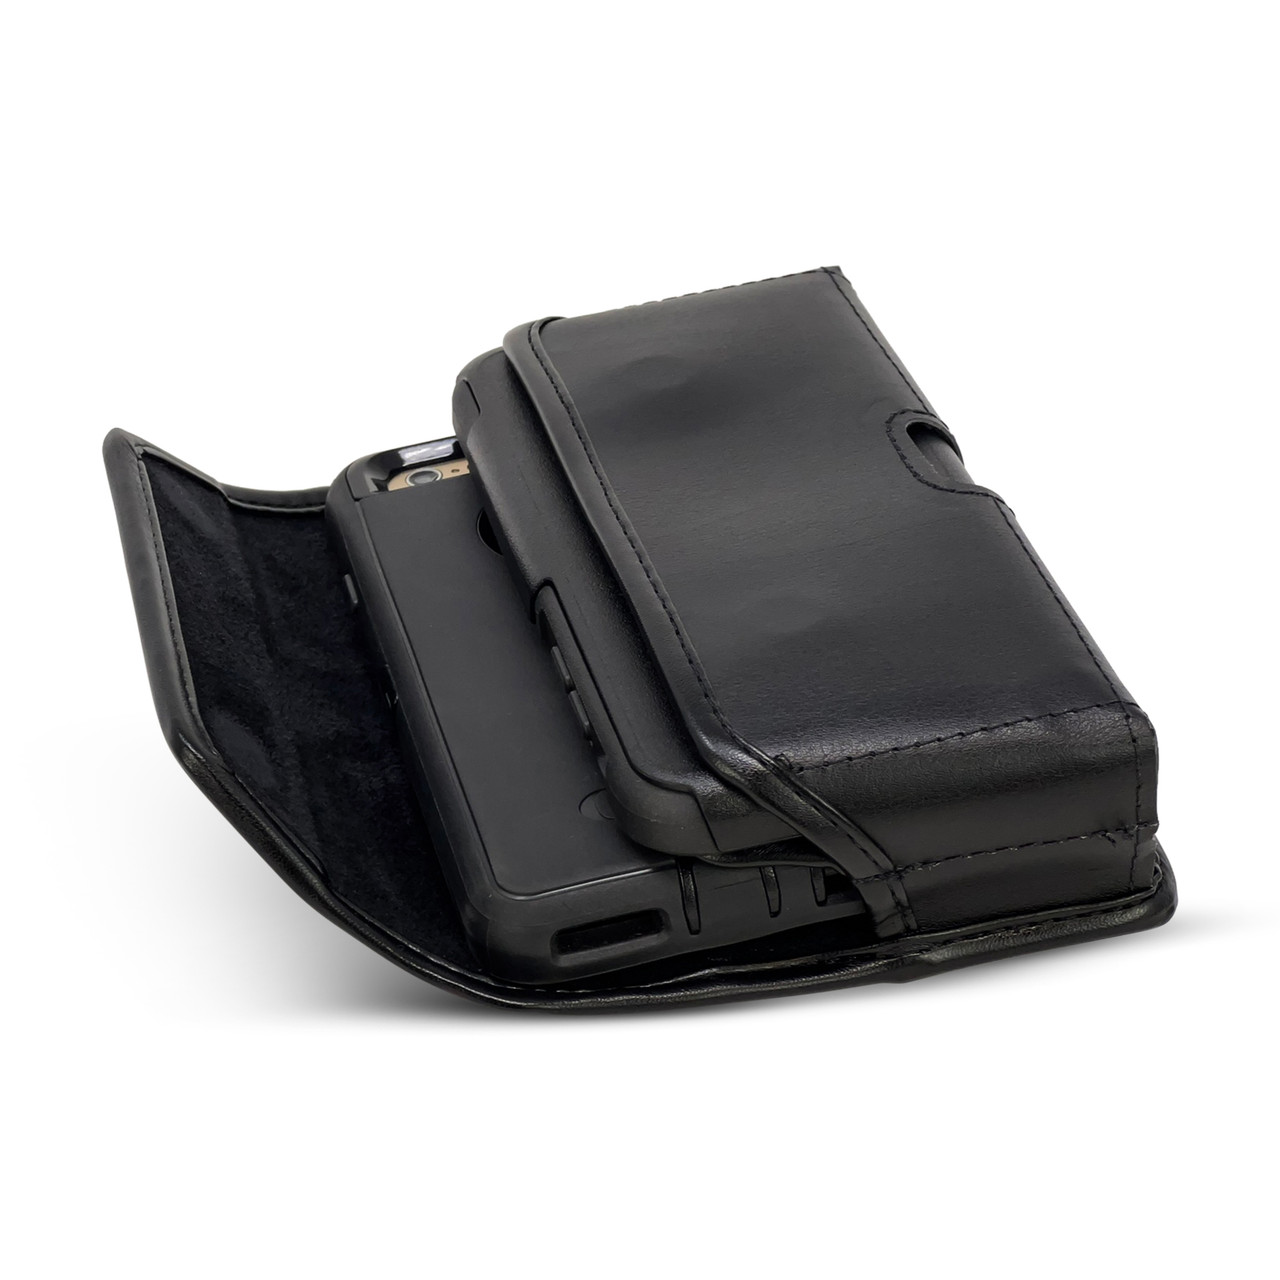 USA Made Dual Phone Holster Carries 2 LARGE Phones - Horizontal Black  Leather Pouch with Heavy Duty Rotating Belt Clip, Made in USA